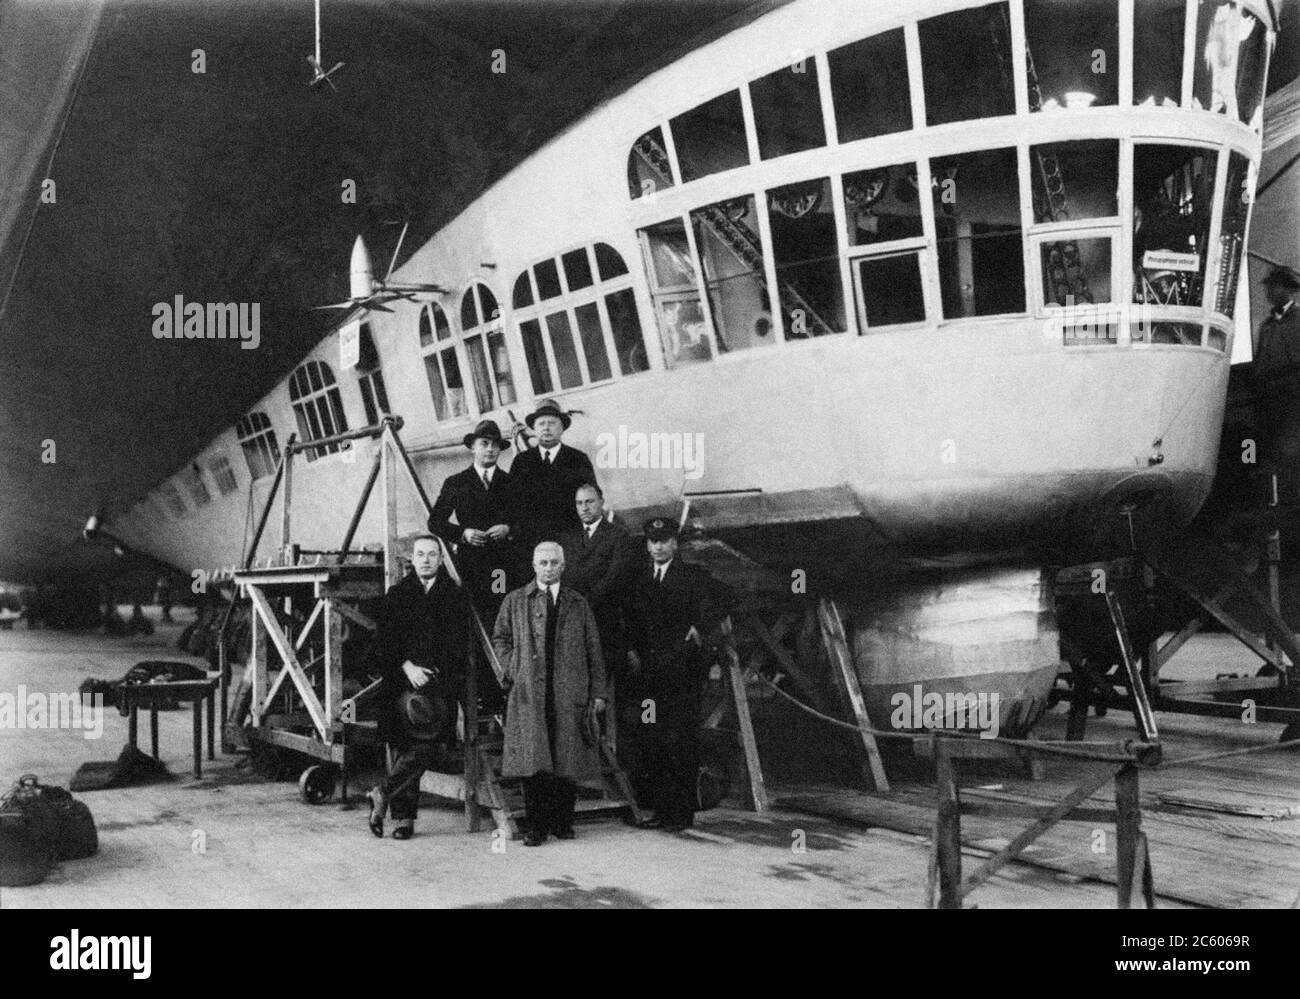 Participants of the 'Hollandfahrt' on October 13, 1929 near the German airship LZ 127 'Graf Zeppelin' in a hangar in Friedrichshafen Stock Photo